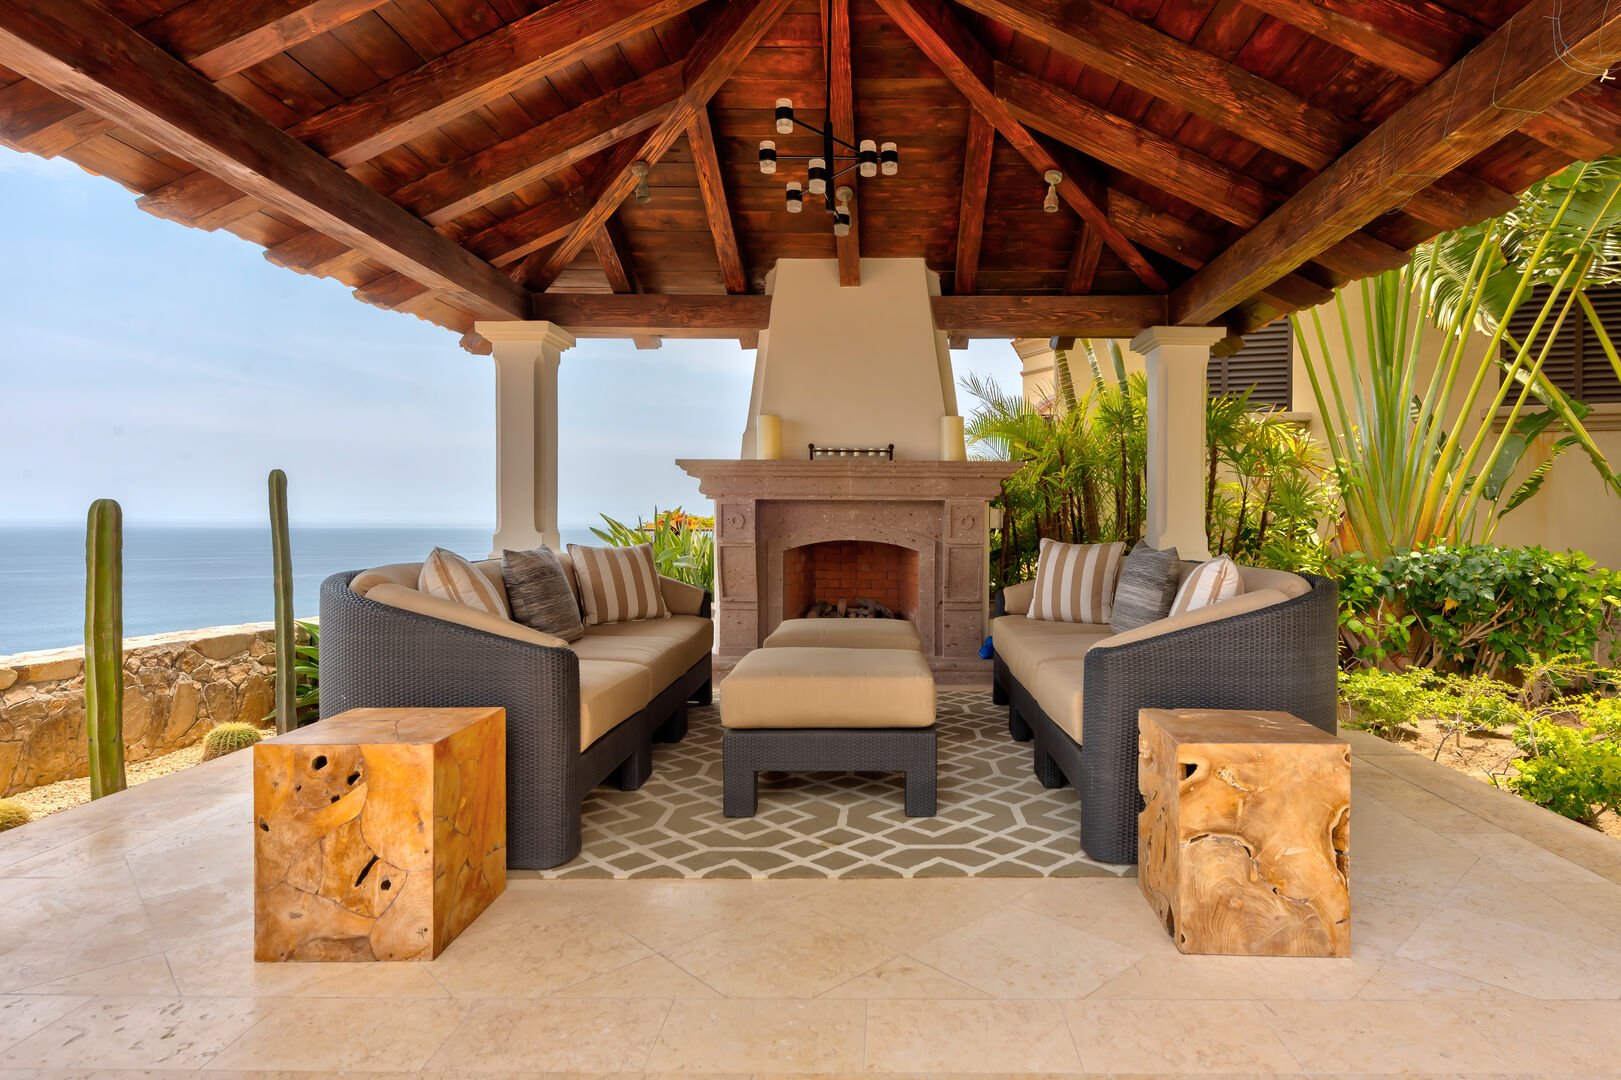 The covered outdoor fire place and seating area at Hacienda 502